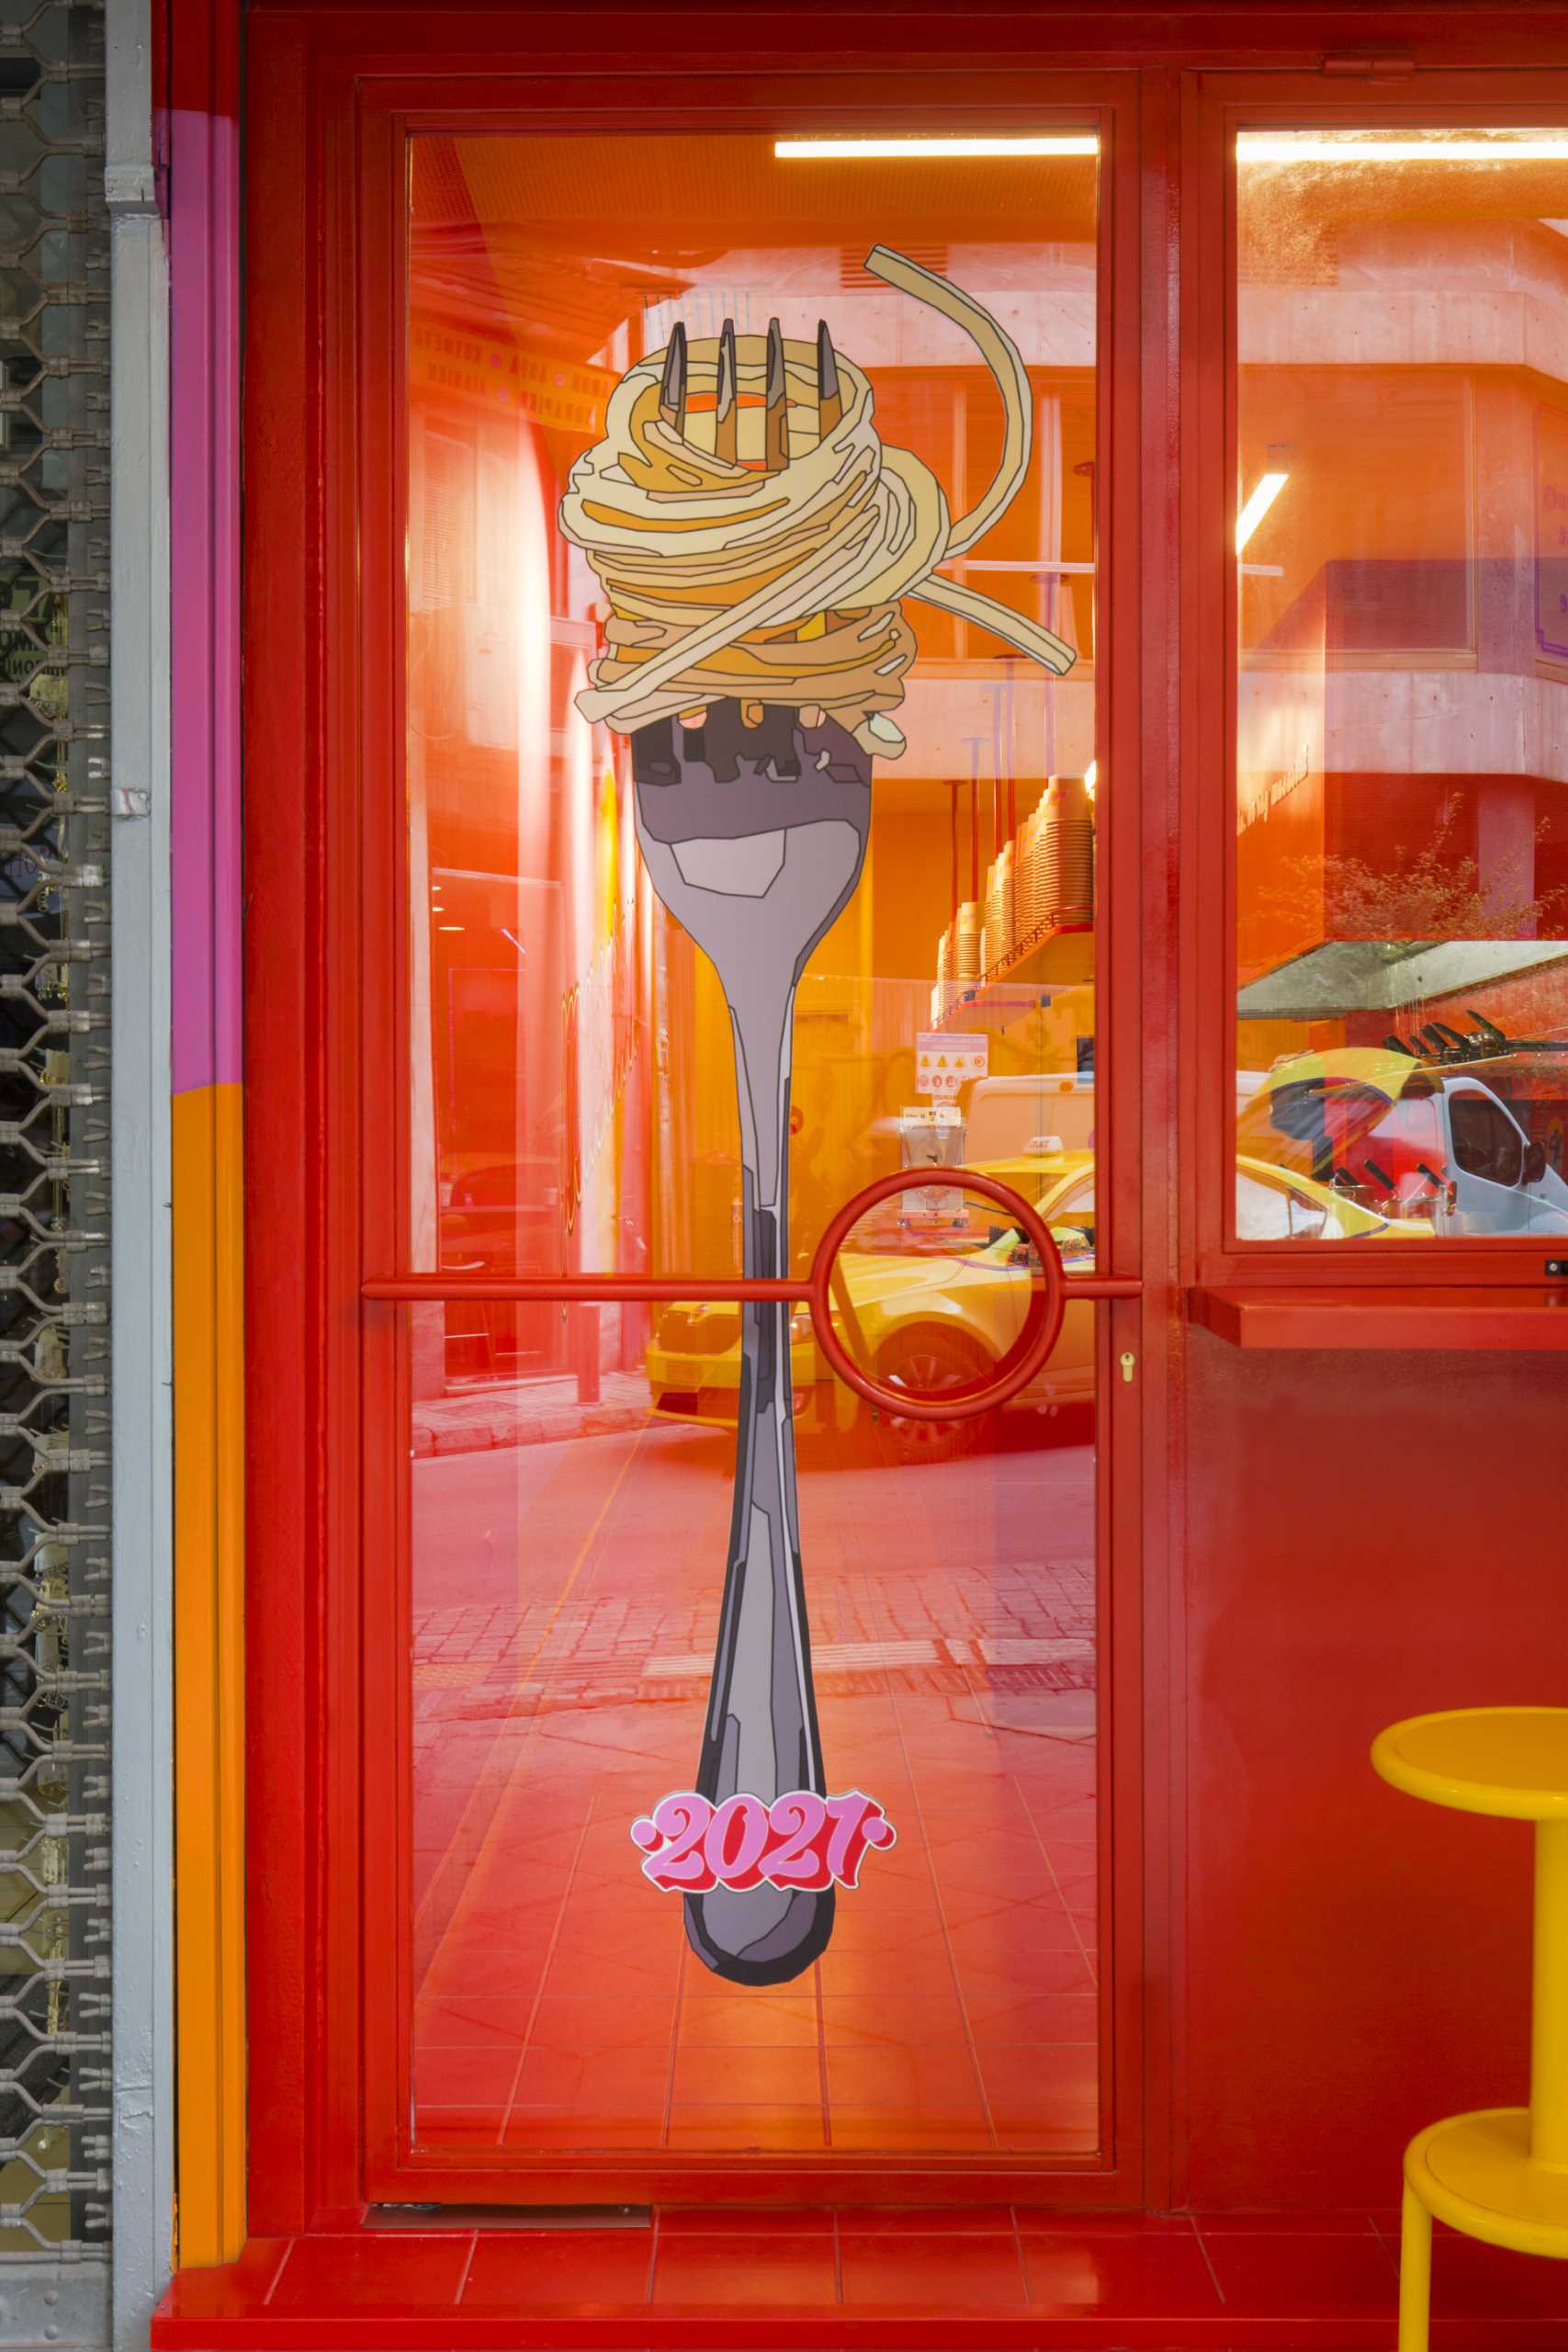 The door illustration of this pasta shop, depicts the classic pasta twirl on a fork, that works as a mouthwatering trigger for any unsuspecting passerby.